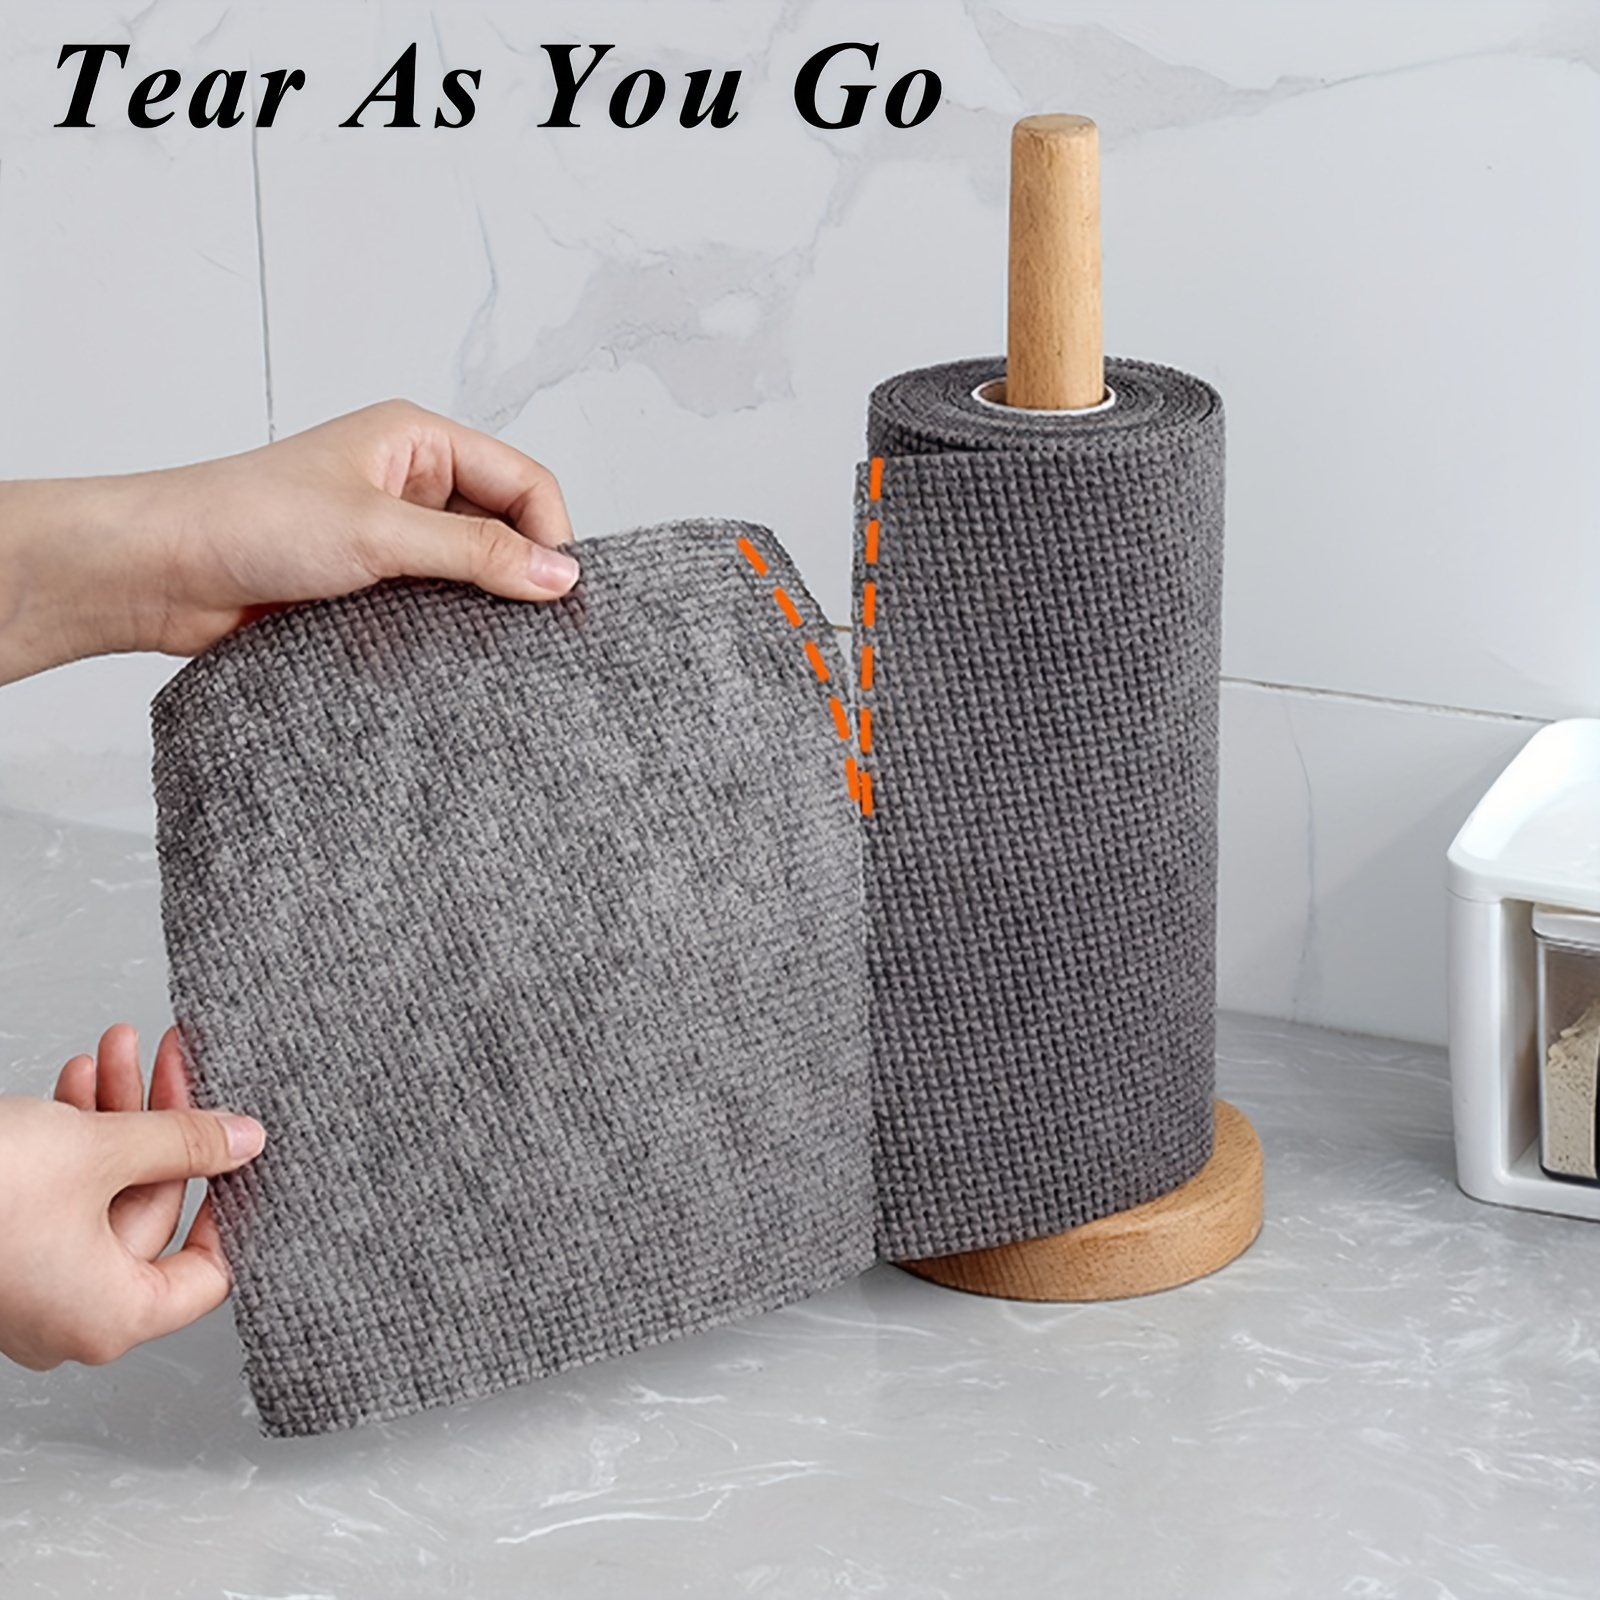 Hands DIY Disposable Cleaning Towels Reusable Cleaning Cloth Handy Cleaning Wipes Washable Kitchen Paper Towels Dish Rags Multi Use Wiping Rag